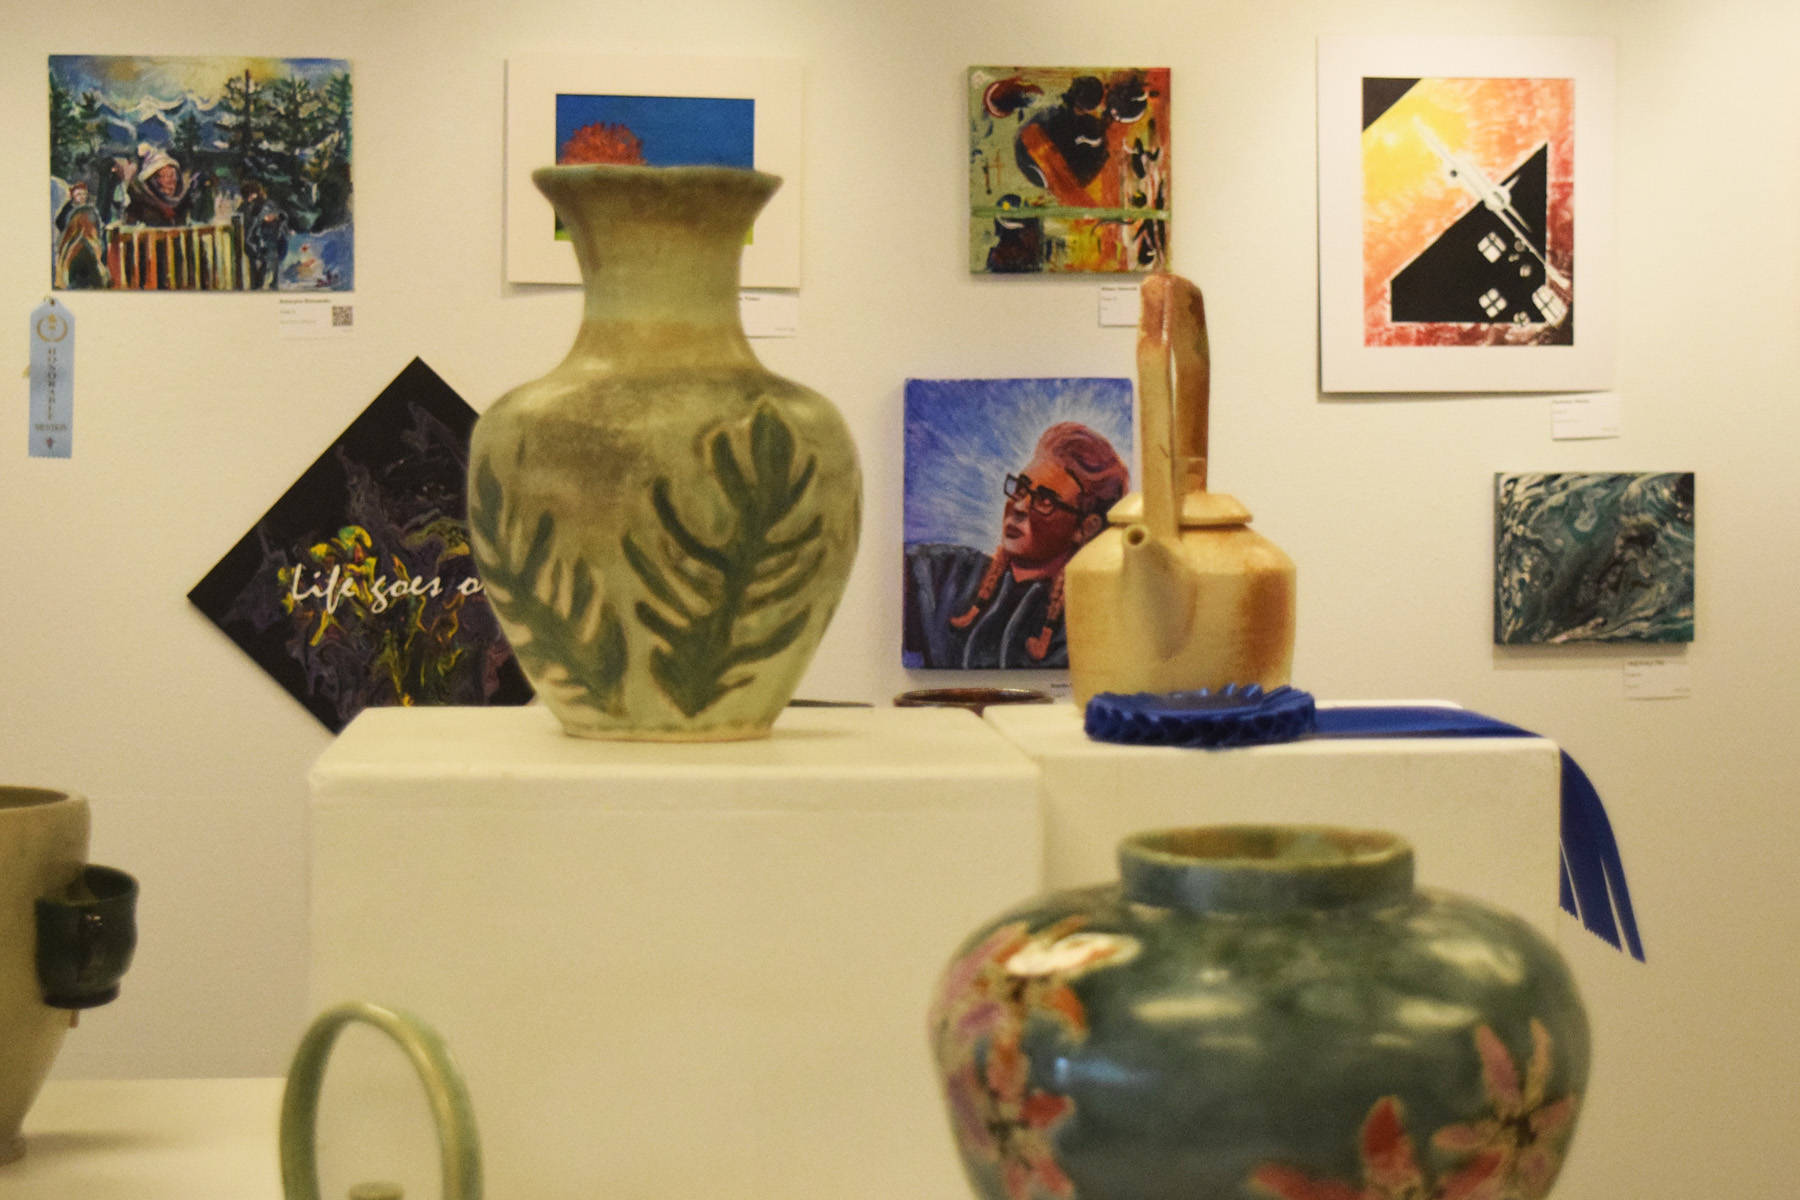 Art pieces are on display at the Kenai Fine Arts Center during Thursday’s opening reception of the 30th anniversary Visual Feast art show. (Photo by Joey Klecka/Peninsula Clarion)